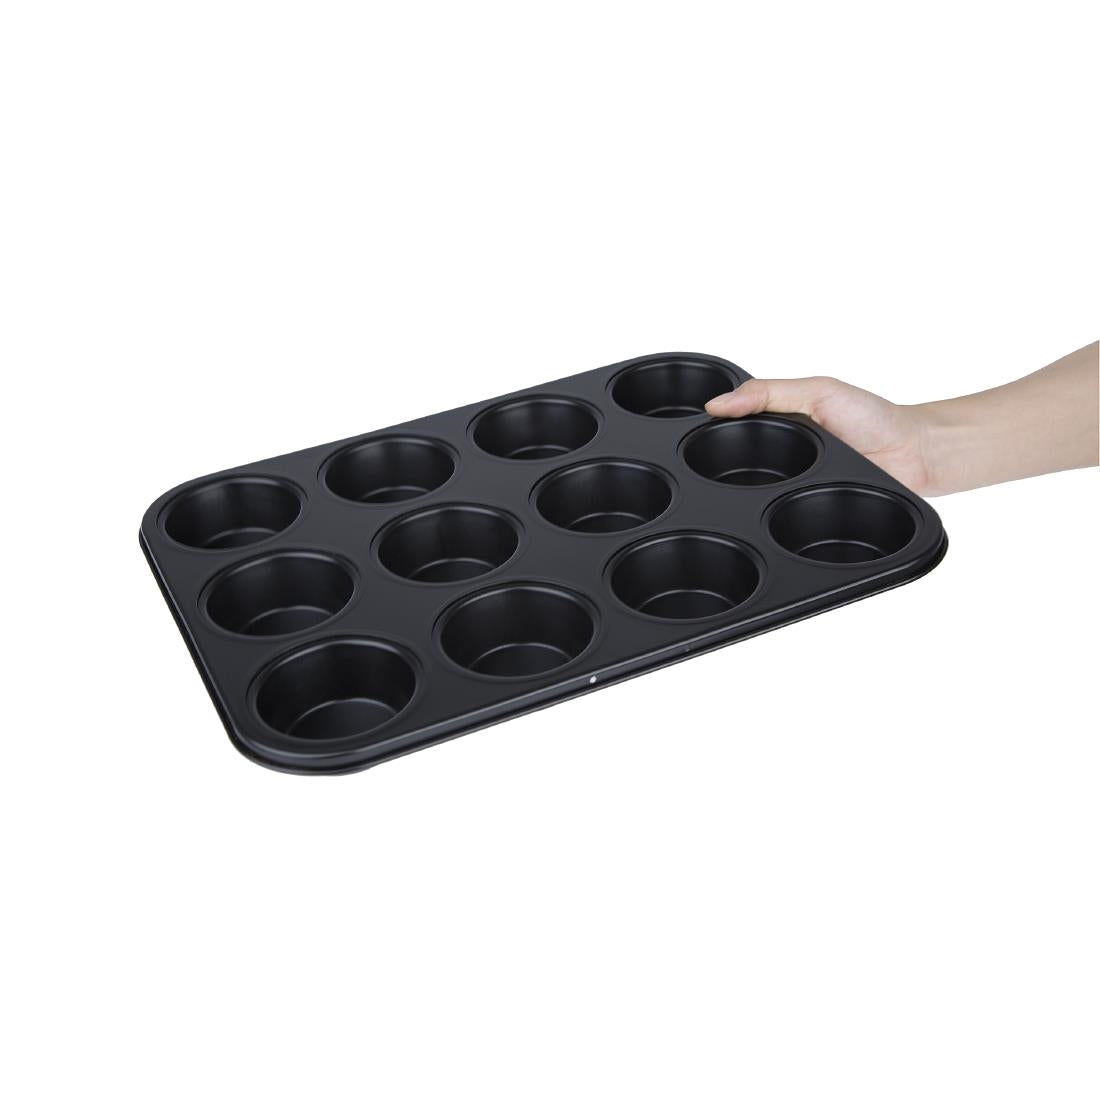 GD011 Vogue Carbon Steel Non-Stick Muffin Tray 12 Cup JD Catering Equipment Solutions Ltd